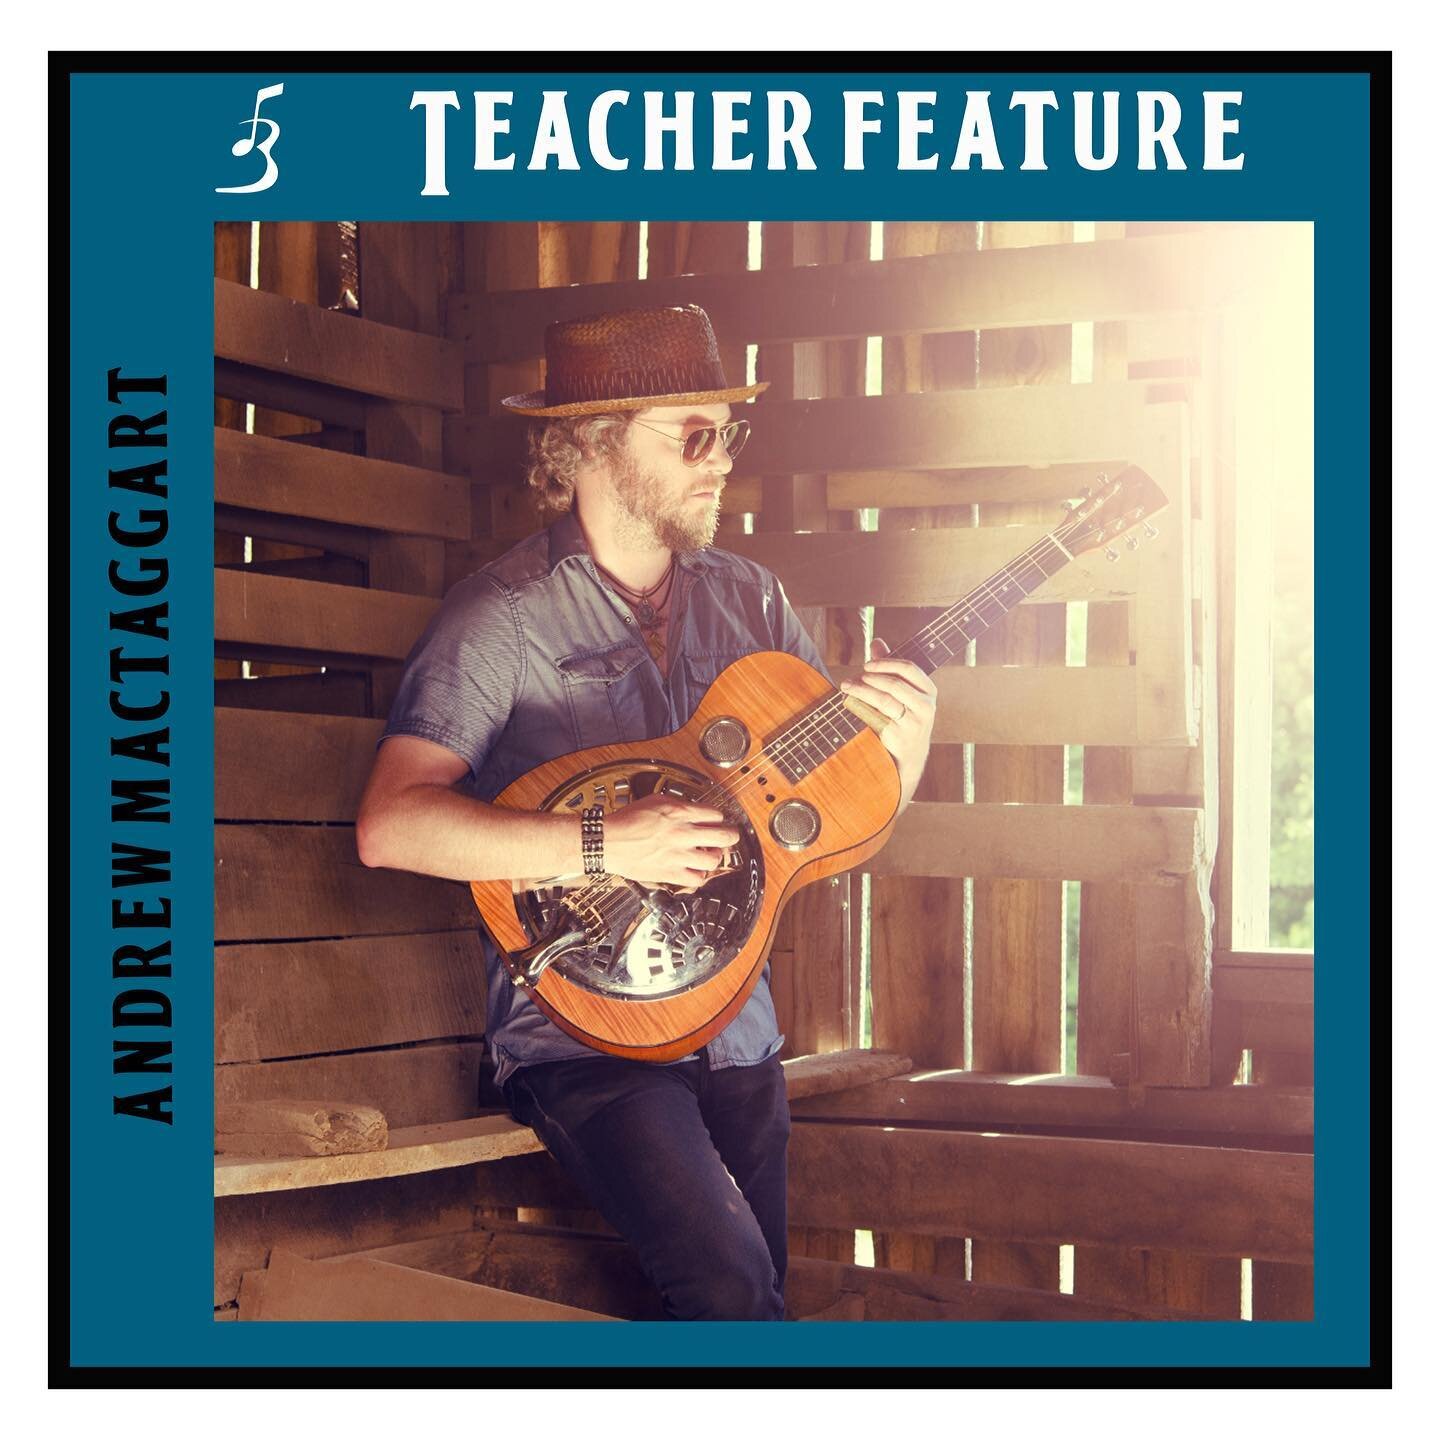 Today&rsquo;s #TeacherFeature is our very own Founder &amp; Instructor Andrew Mactaggart!!!
Andrew has a couple of prime time spots available if anyone is thinking of taking a few guitar lessons... email us at burlingtonemusic@gmail.com for available